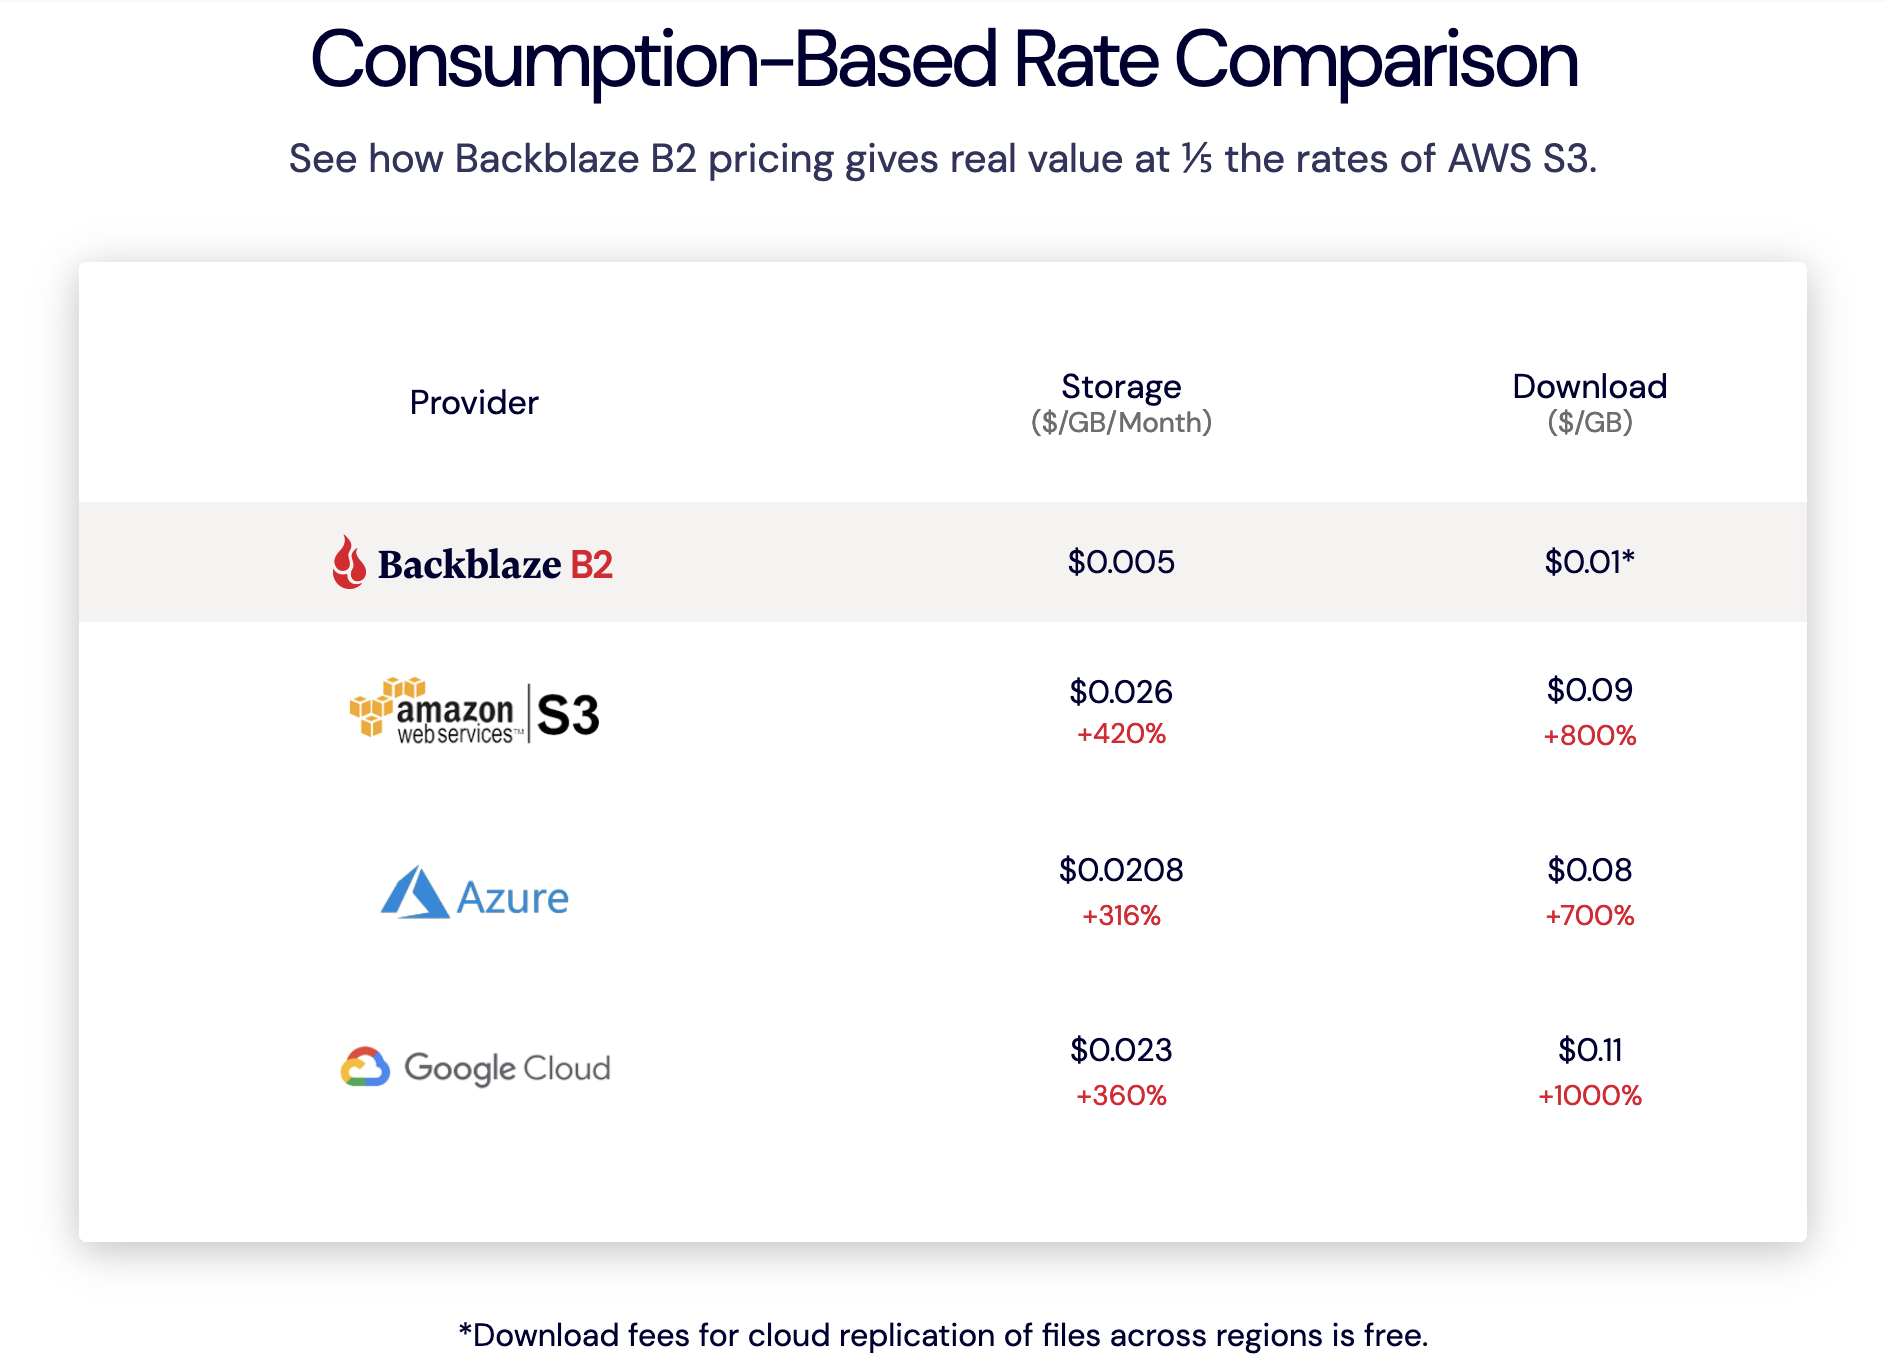 Backblaze pricing - which is entirely accurate. Recommended.